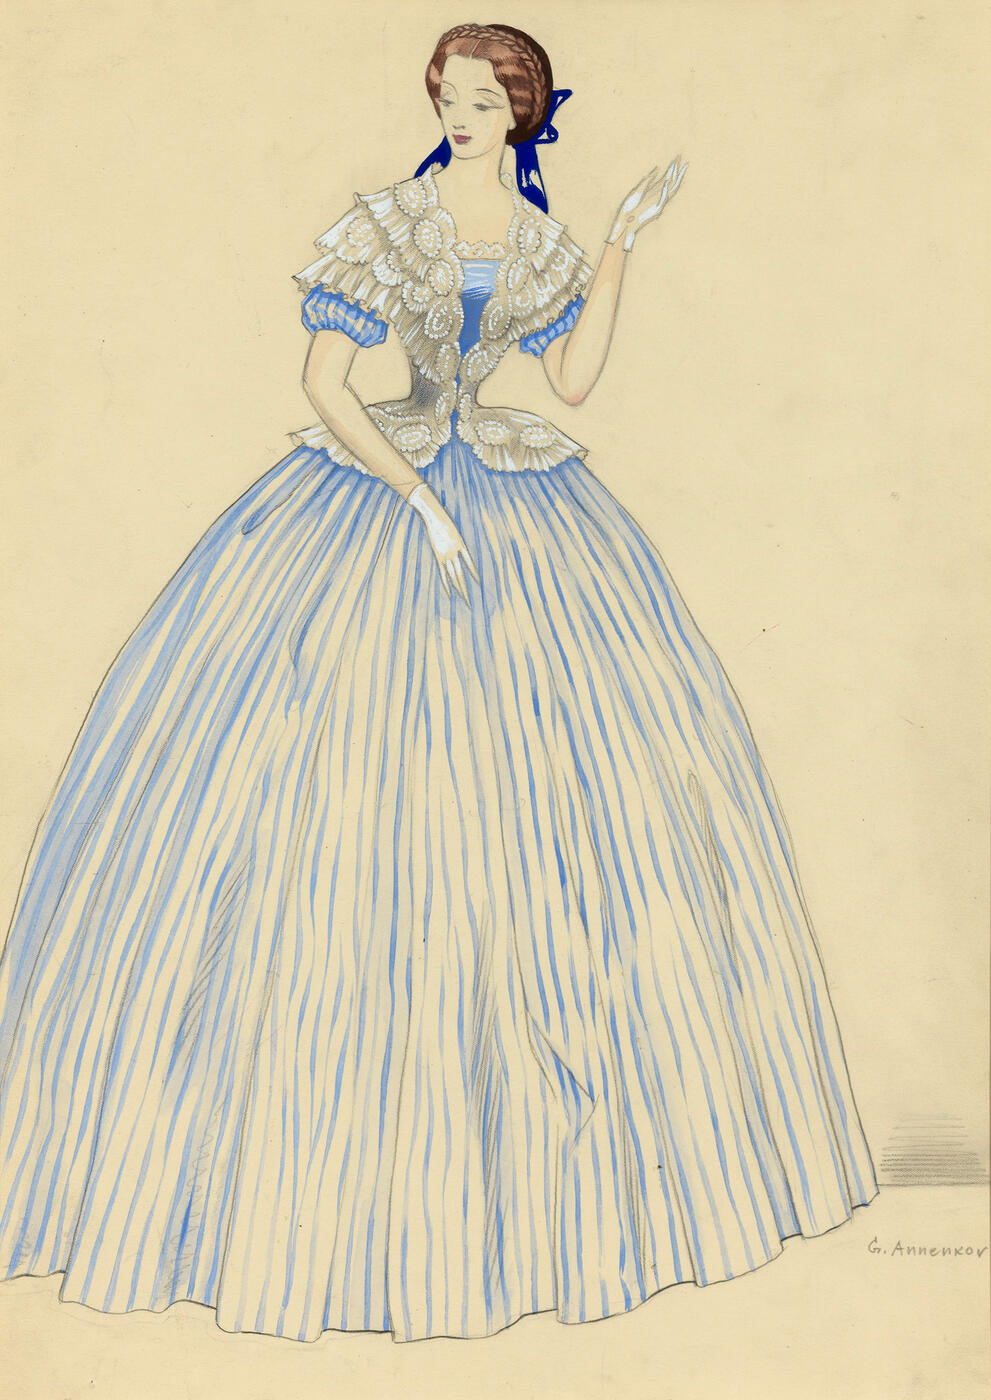 Lady in a Blue Gown, Costume Design for the Film "La Signora Dalle Camelie" by Carmine Gallone